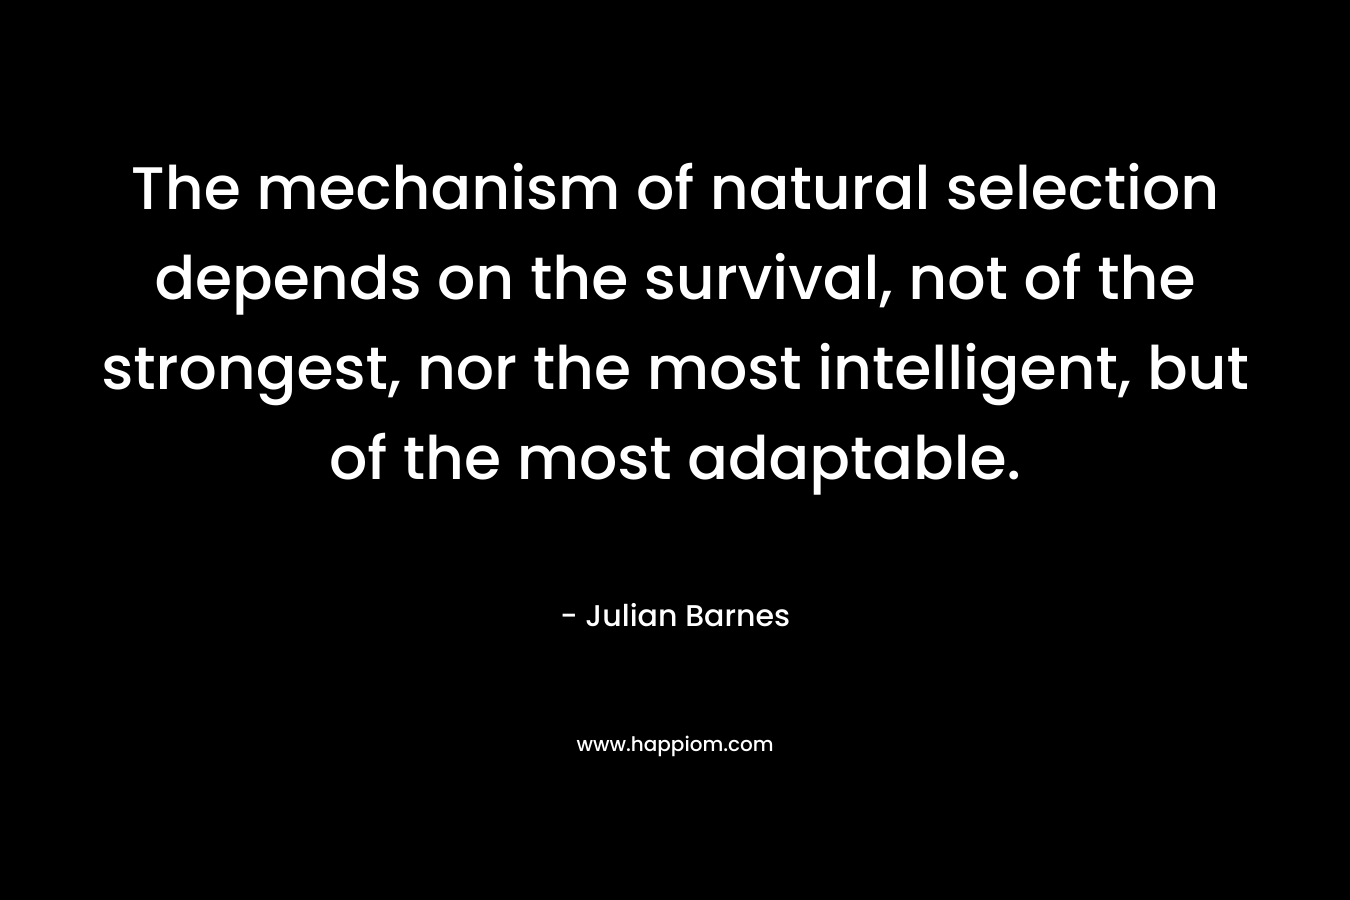 The mechanism of natural selection depends on the survival, not of the strongest, nor the most intelligent, but of the most adaptable. – Julian Barnes